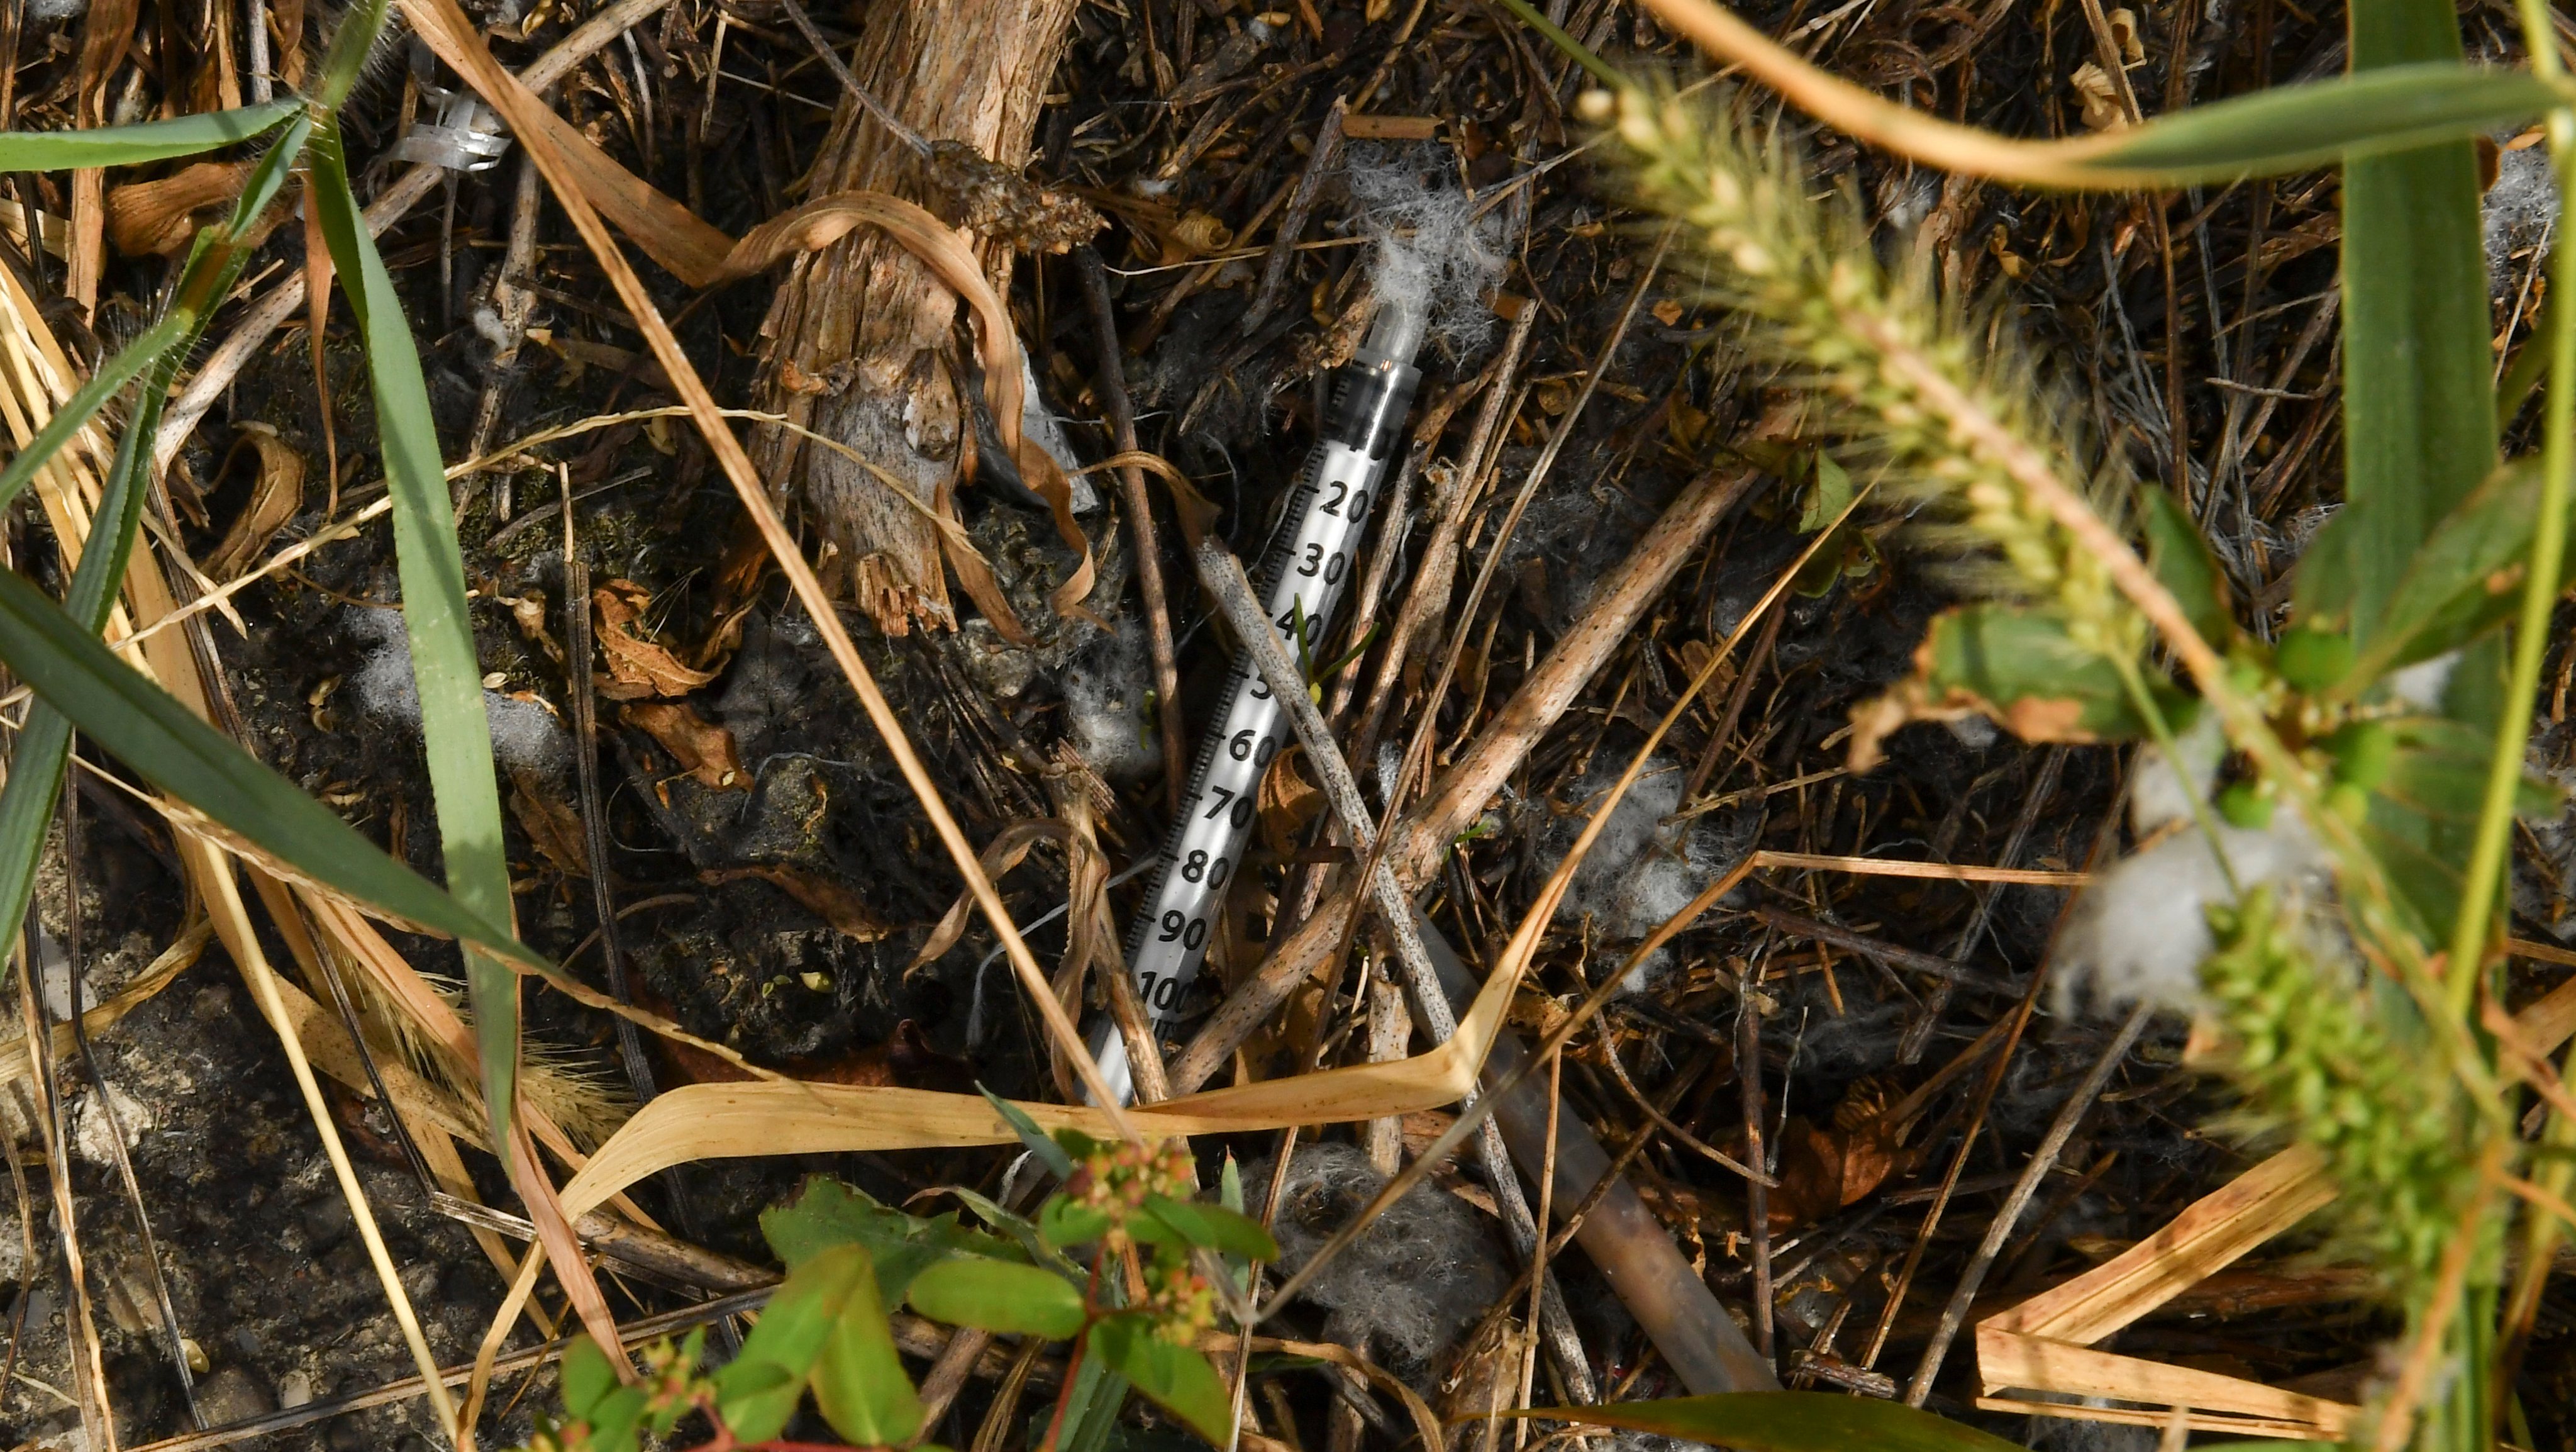 HUNTINGTON, WV - OCTOBER 2: A used syringe is seen by the rail